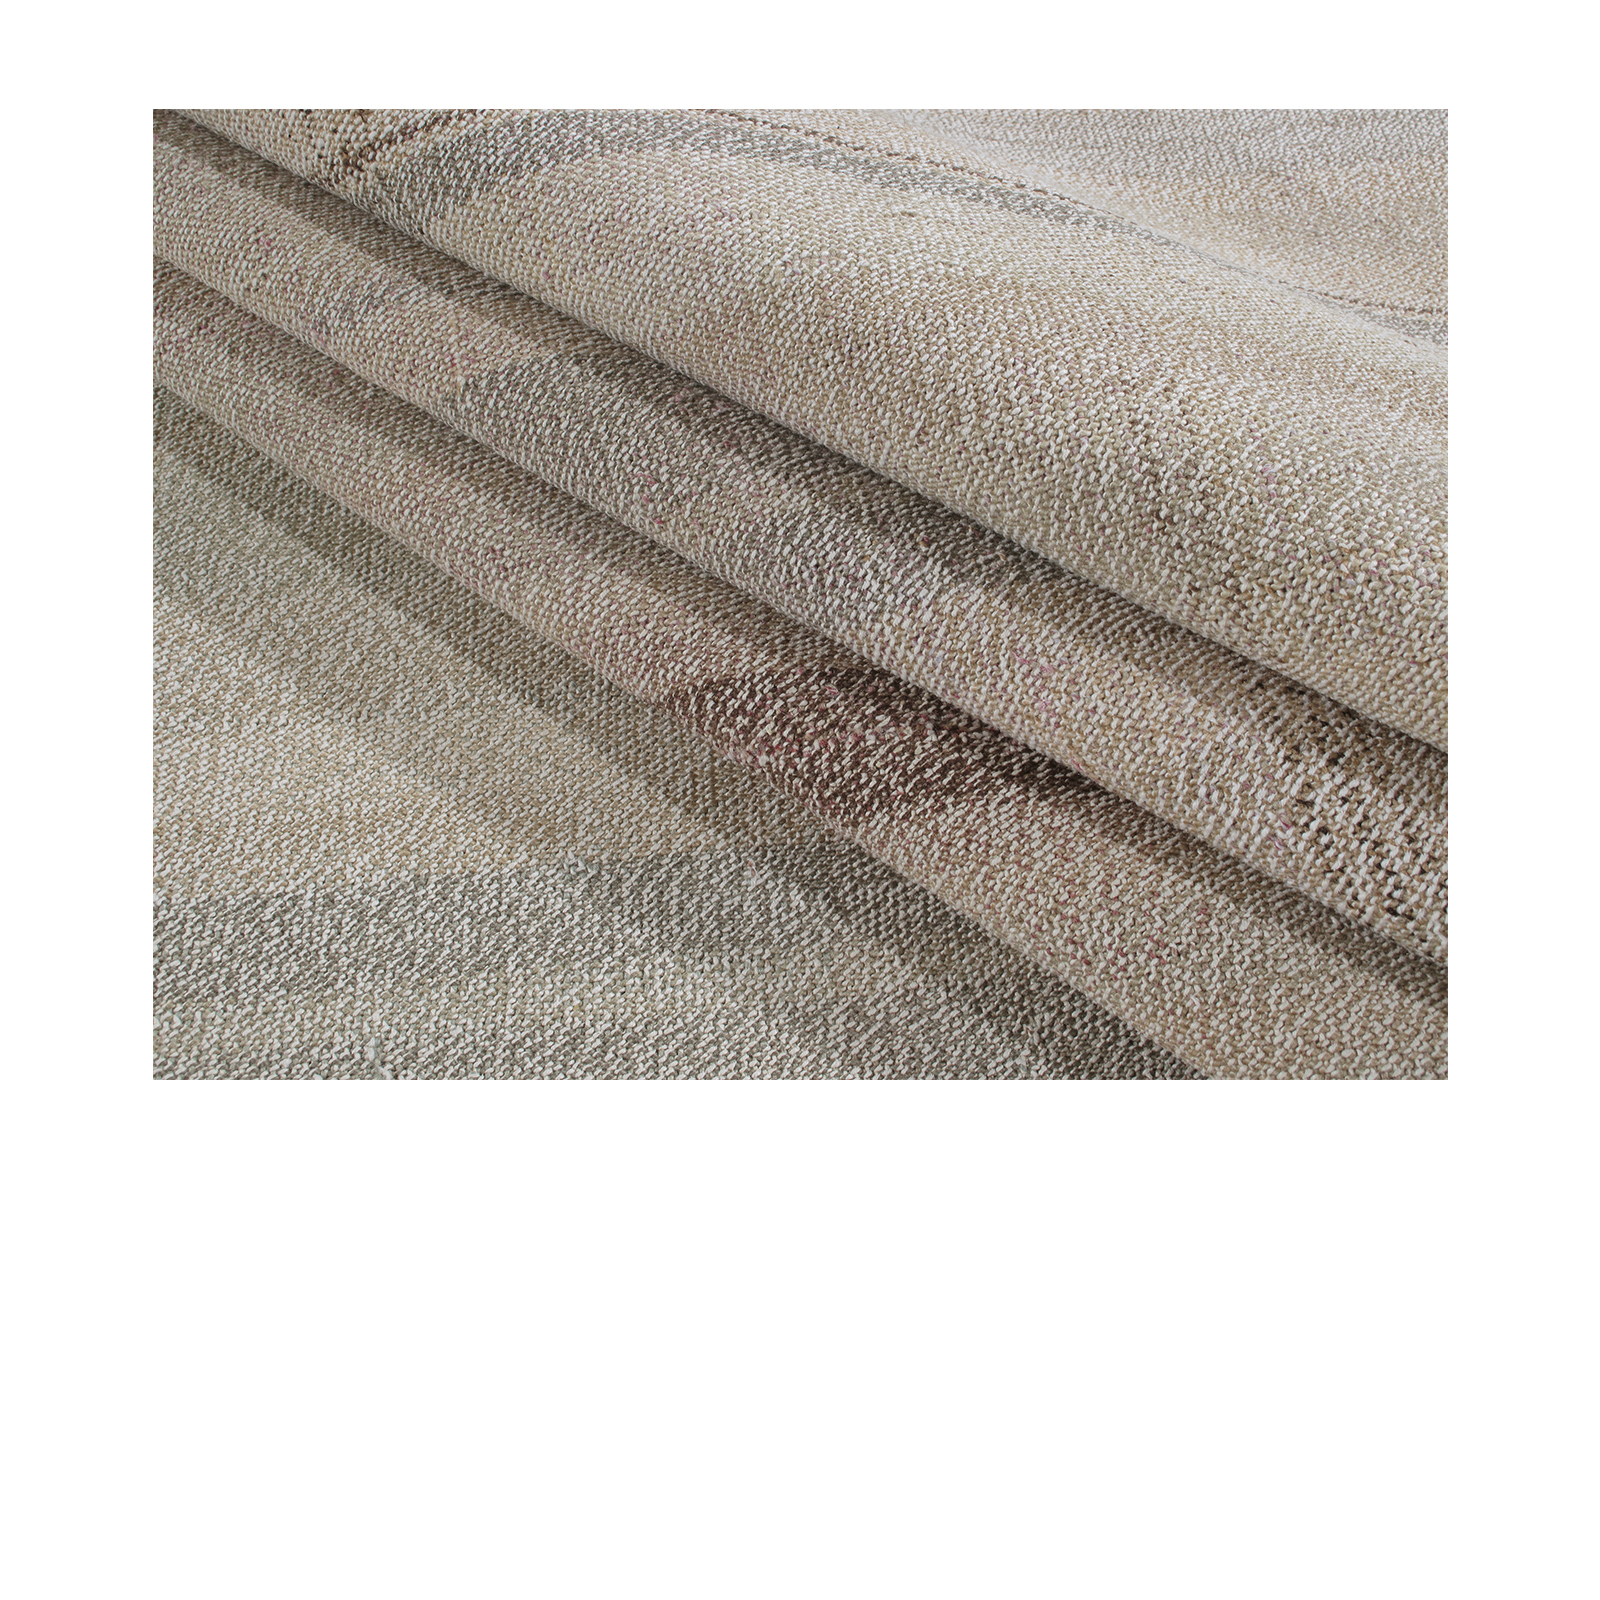 This Vintage flatweave is hand-woven and made of wool and cotton.